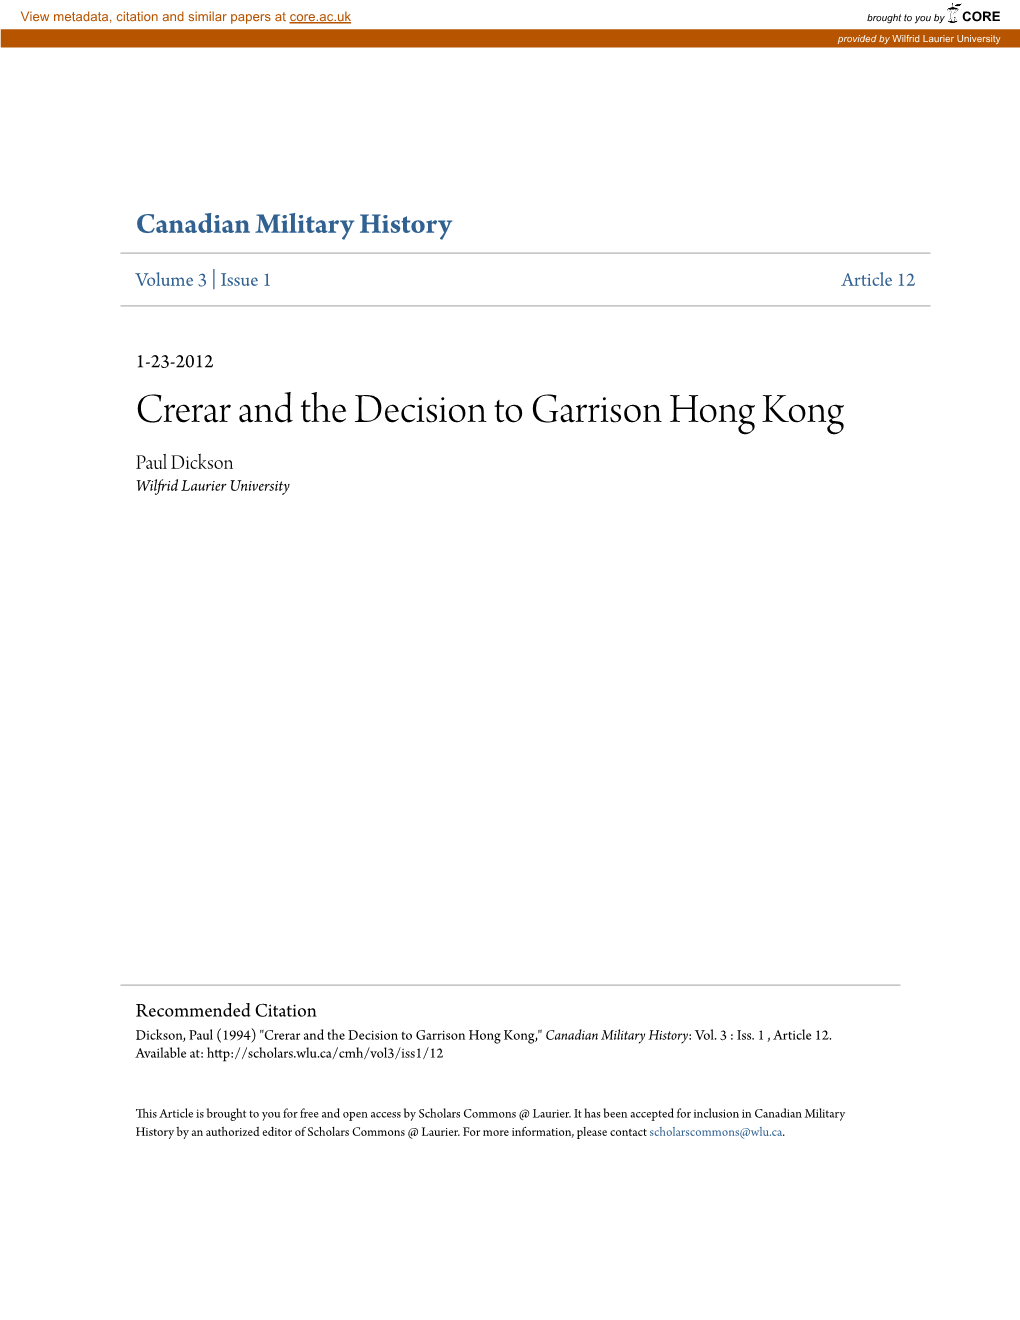 Crerar and the Decision to Garrison Hong Kong Paul Dickson Wilfrid Laurier University